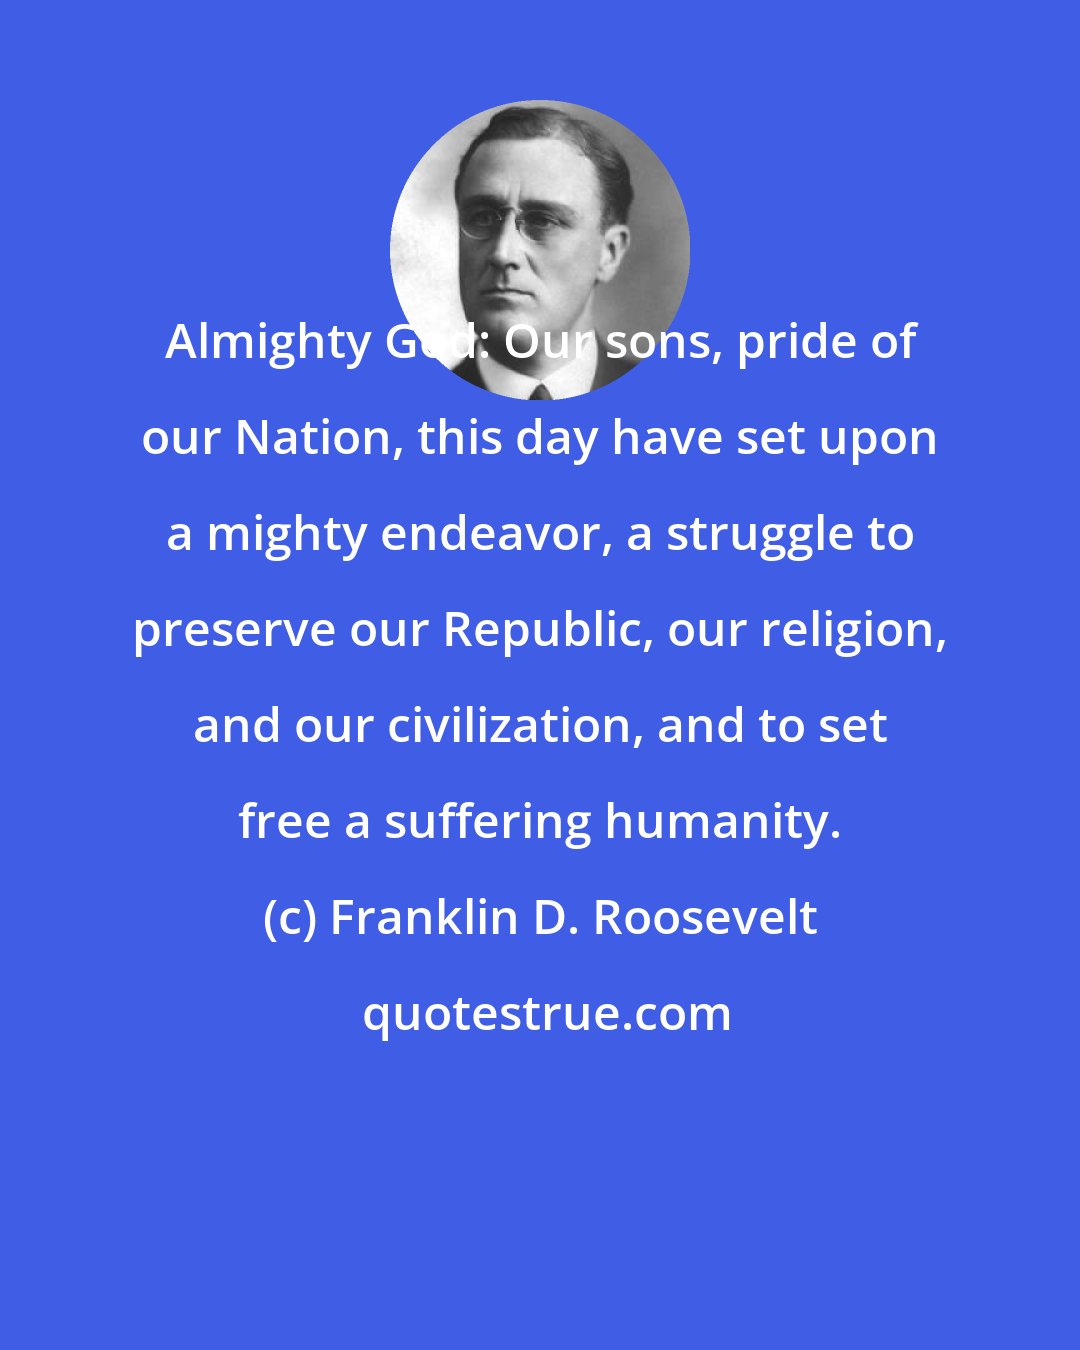 Franklin D. Roosevelt: Almighty God: Our sons, pride of our Nation, this day have set upon a mighty endeavor, a struggle to preserve our Republic, our religion, and our civilization, and to set free a suffering humanity.